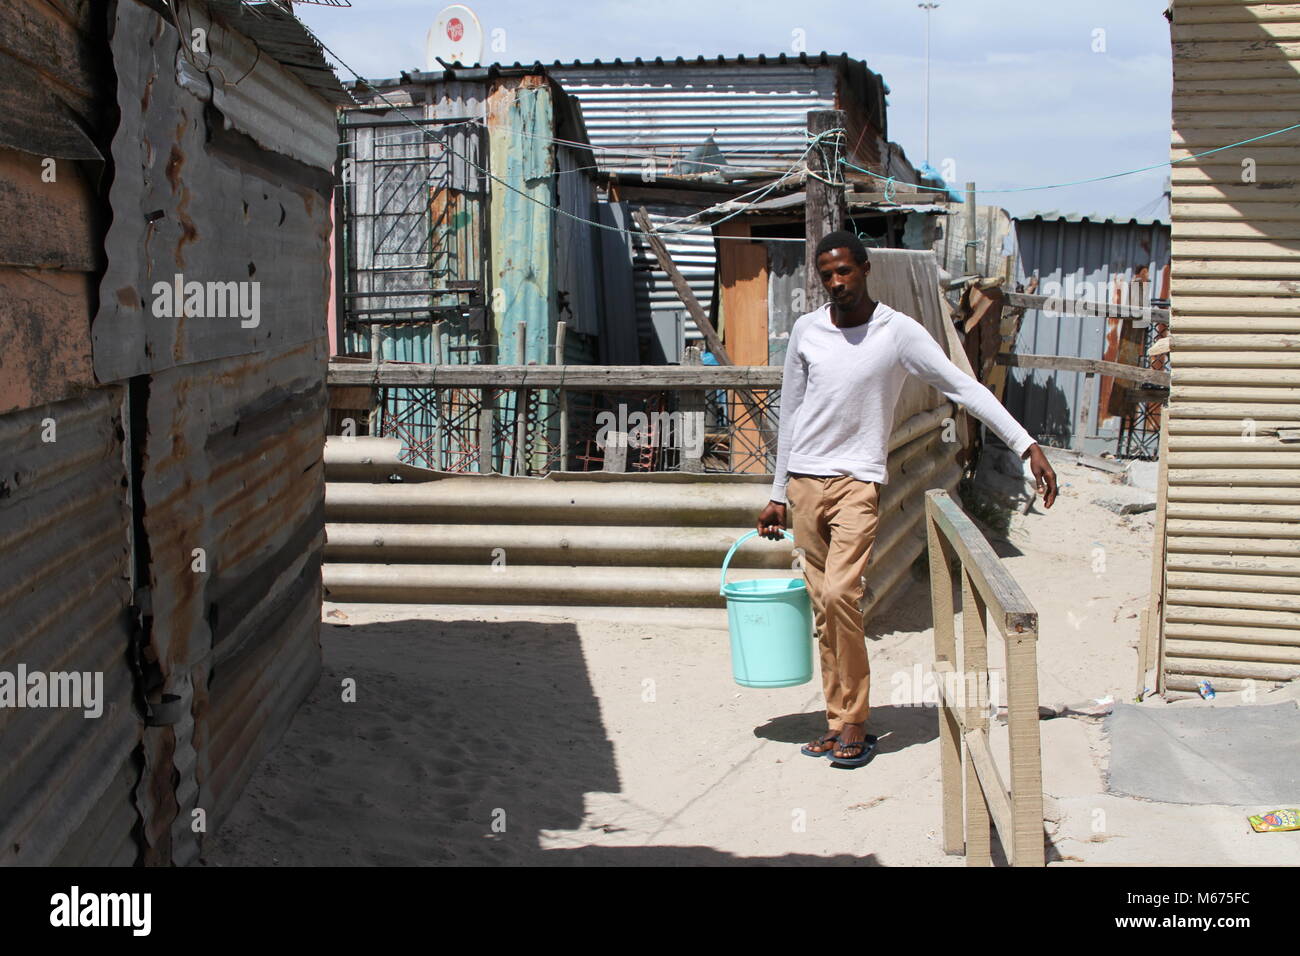 09 February 2018, South Africa, Cape Town, Khayelitsha: Anele Goba, 34, who lives in the Khayelitsha slum area outside Cape Town, has to carry water from a communal tap to his hut every day. He has little sympathy for the middle class, who fears 'zero hour', when Cape Town has to turn off the water due to a drought. Photo: Kristin Palitza/dpa Stock Photo